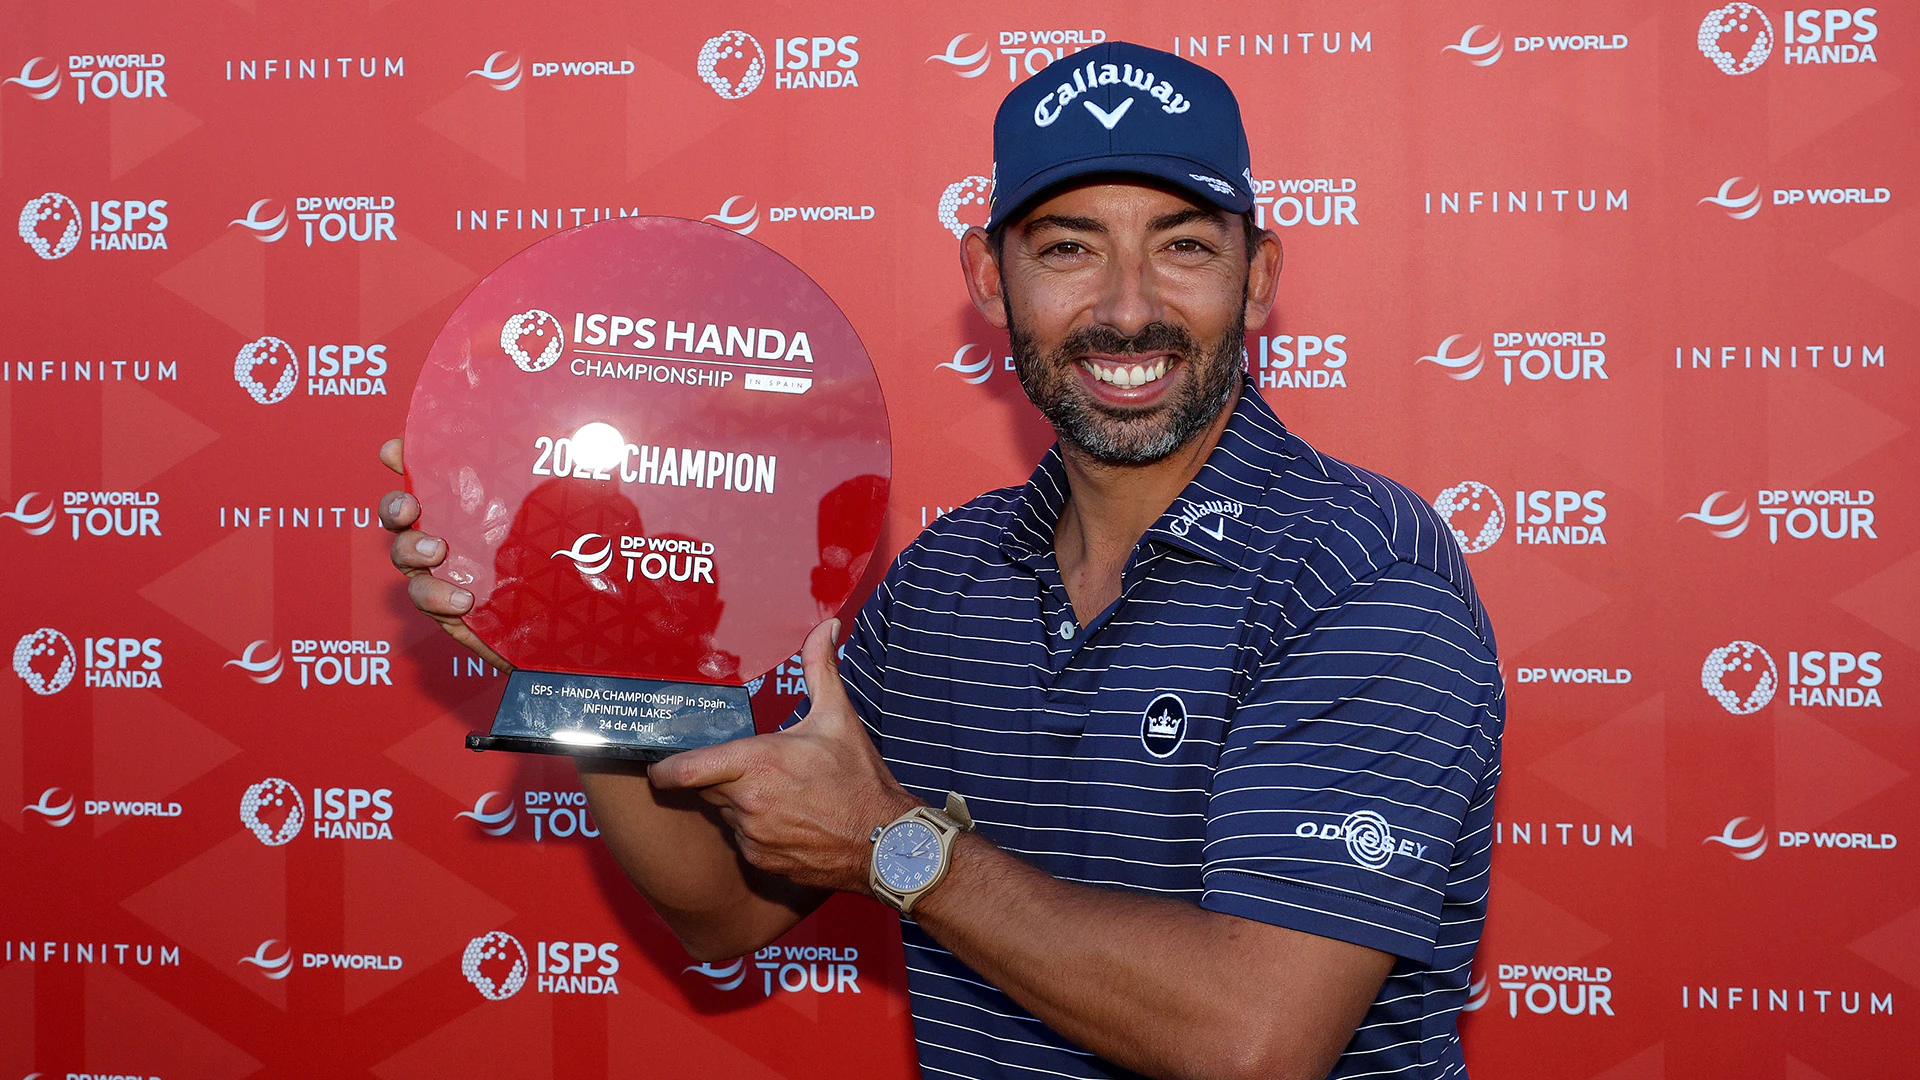 Pablo Larrazabal closes in 62 to claim ISPS Handa Championship in Spain